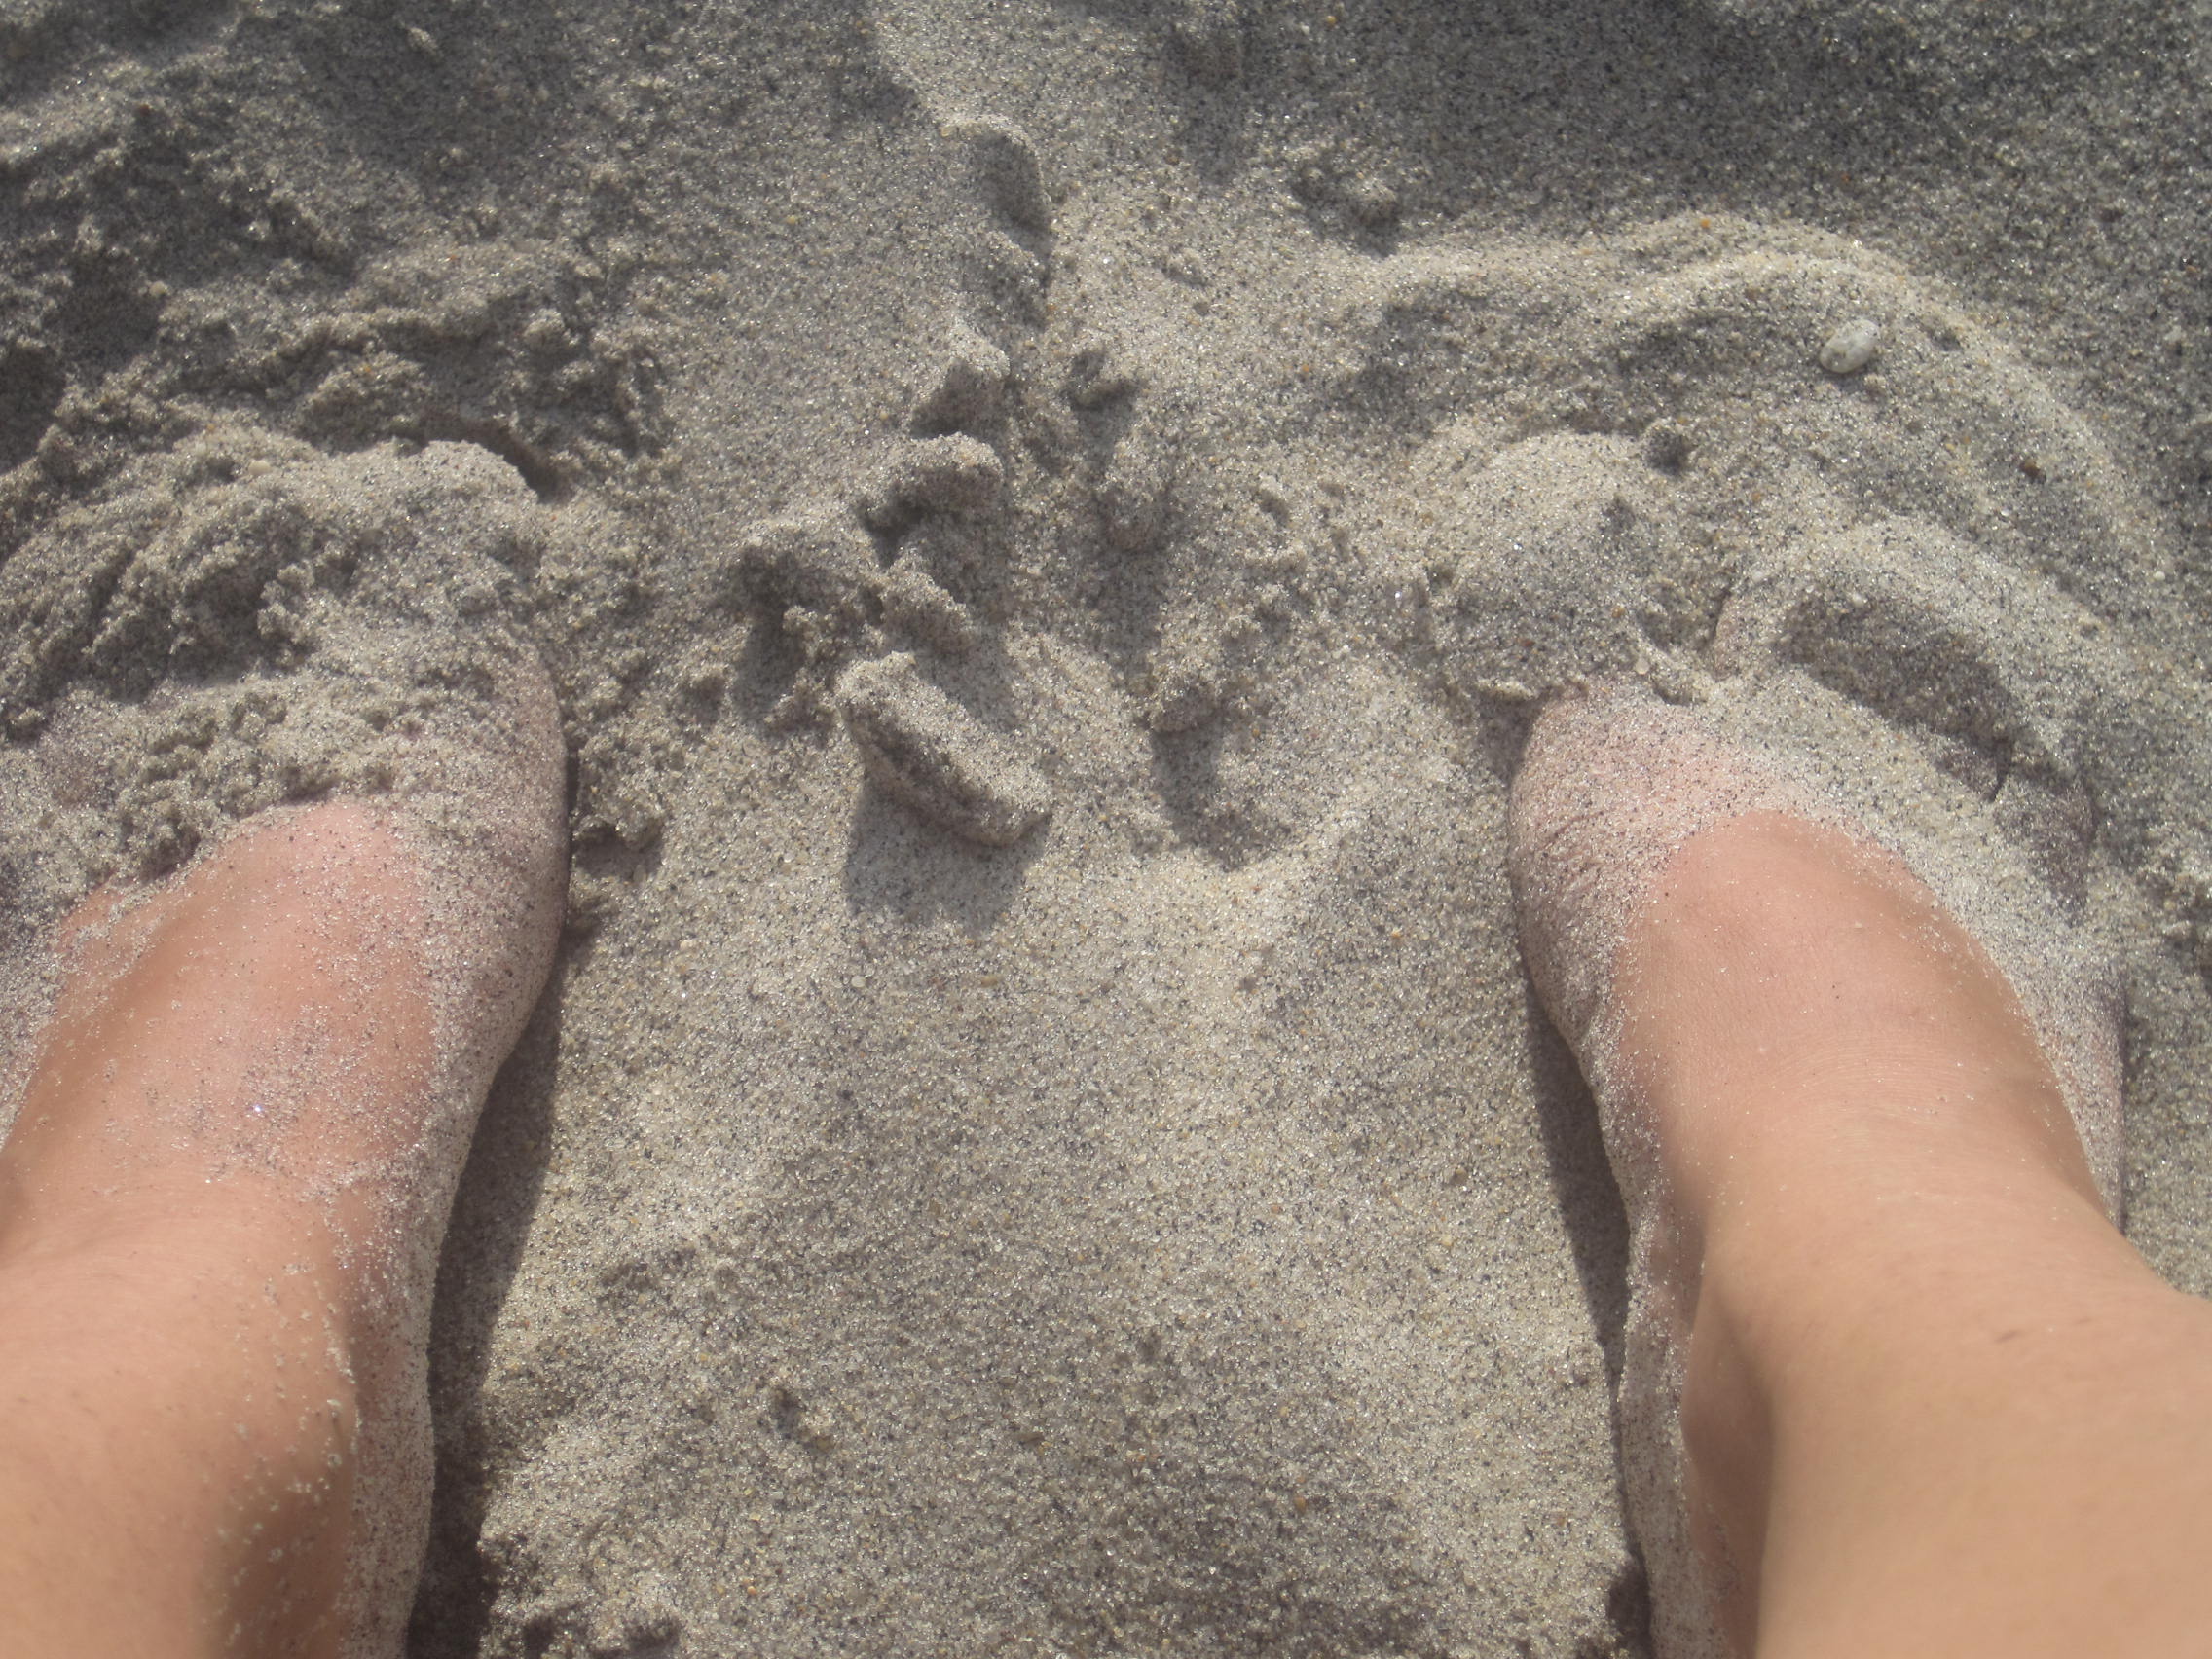 toes in sand #warmth | warmth | Pinterest